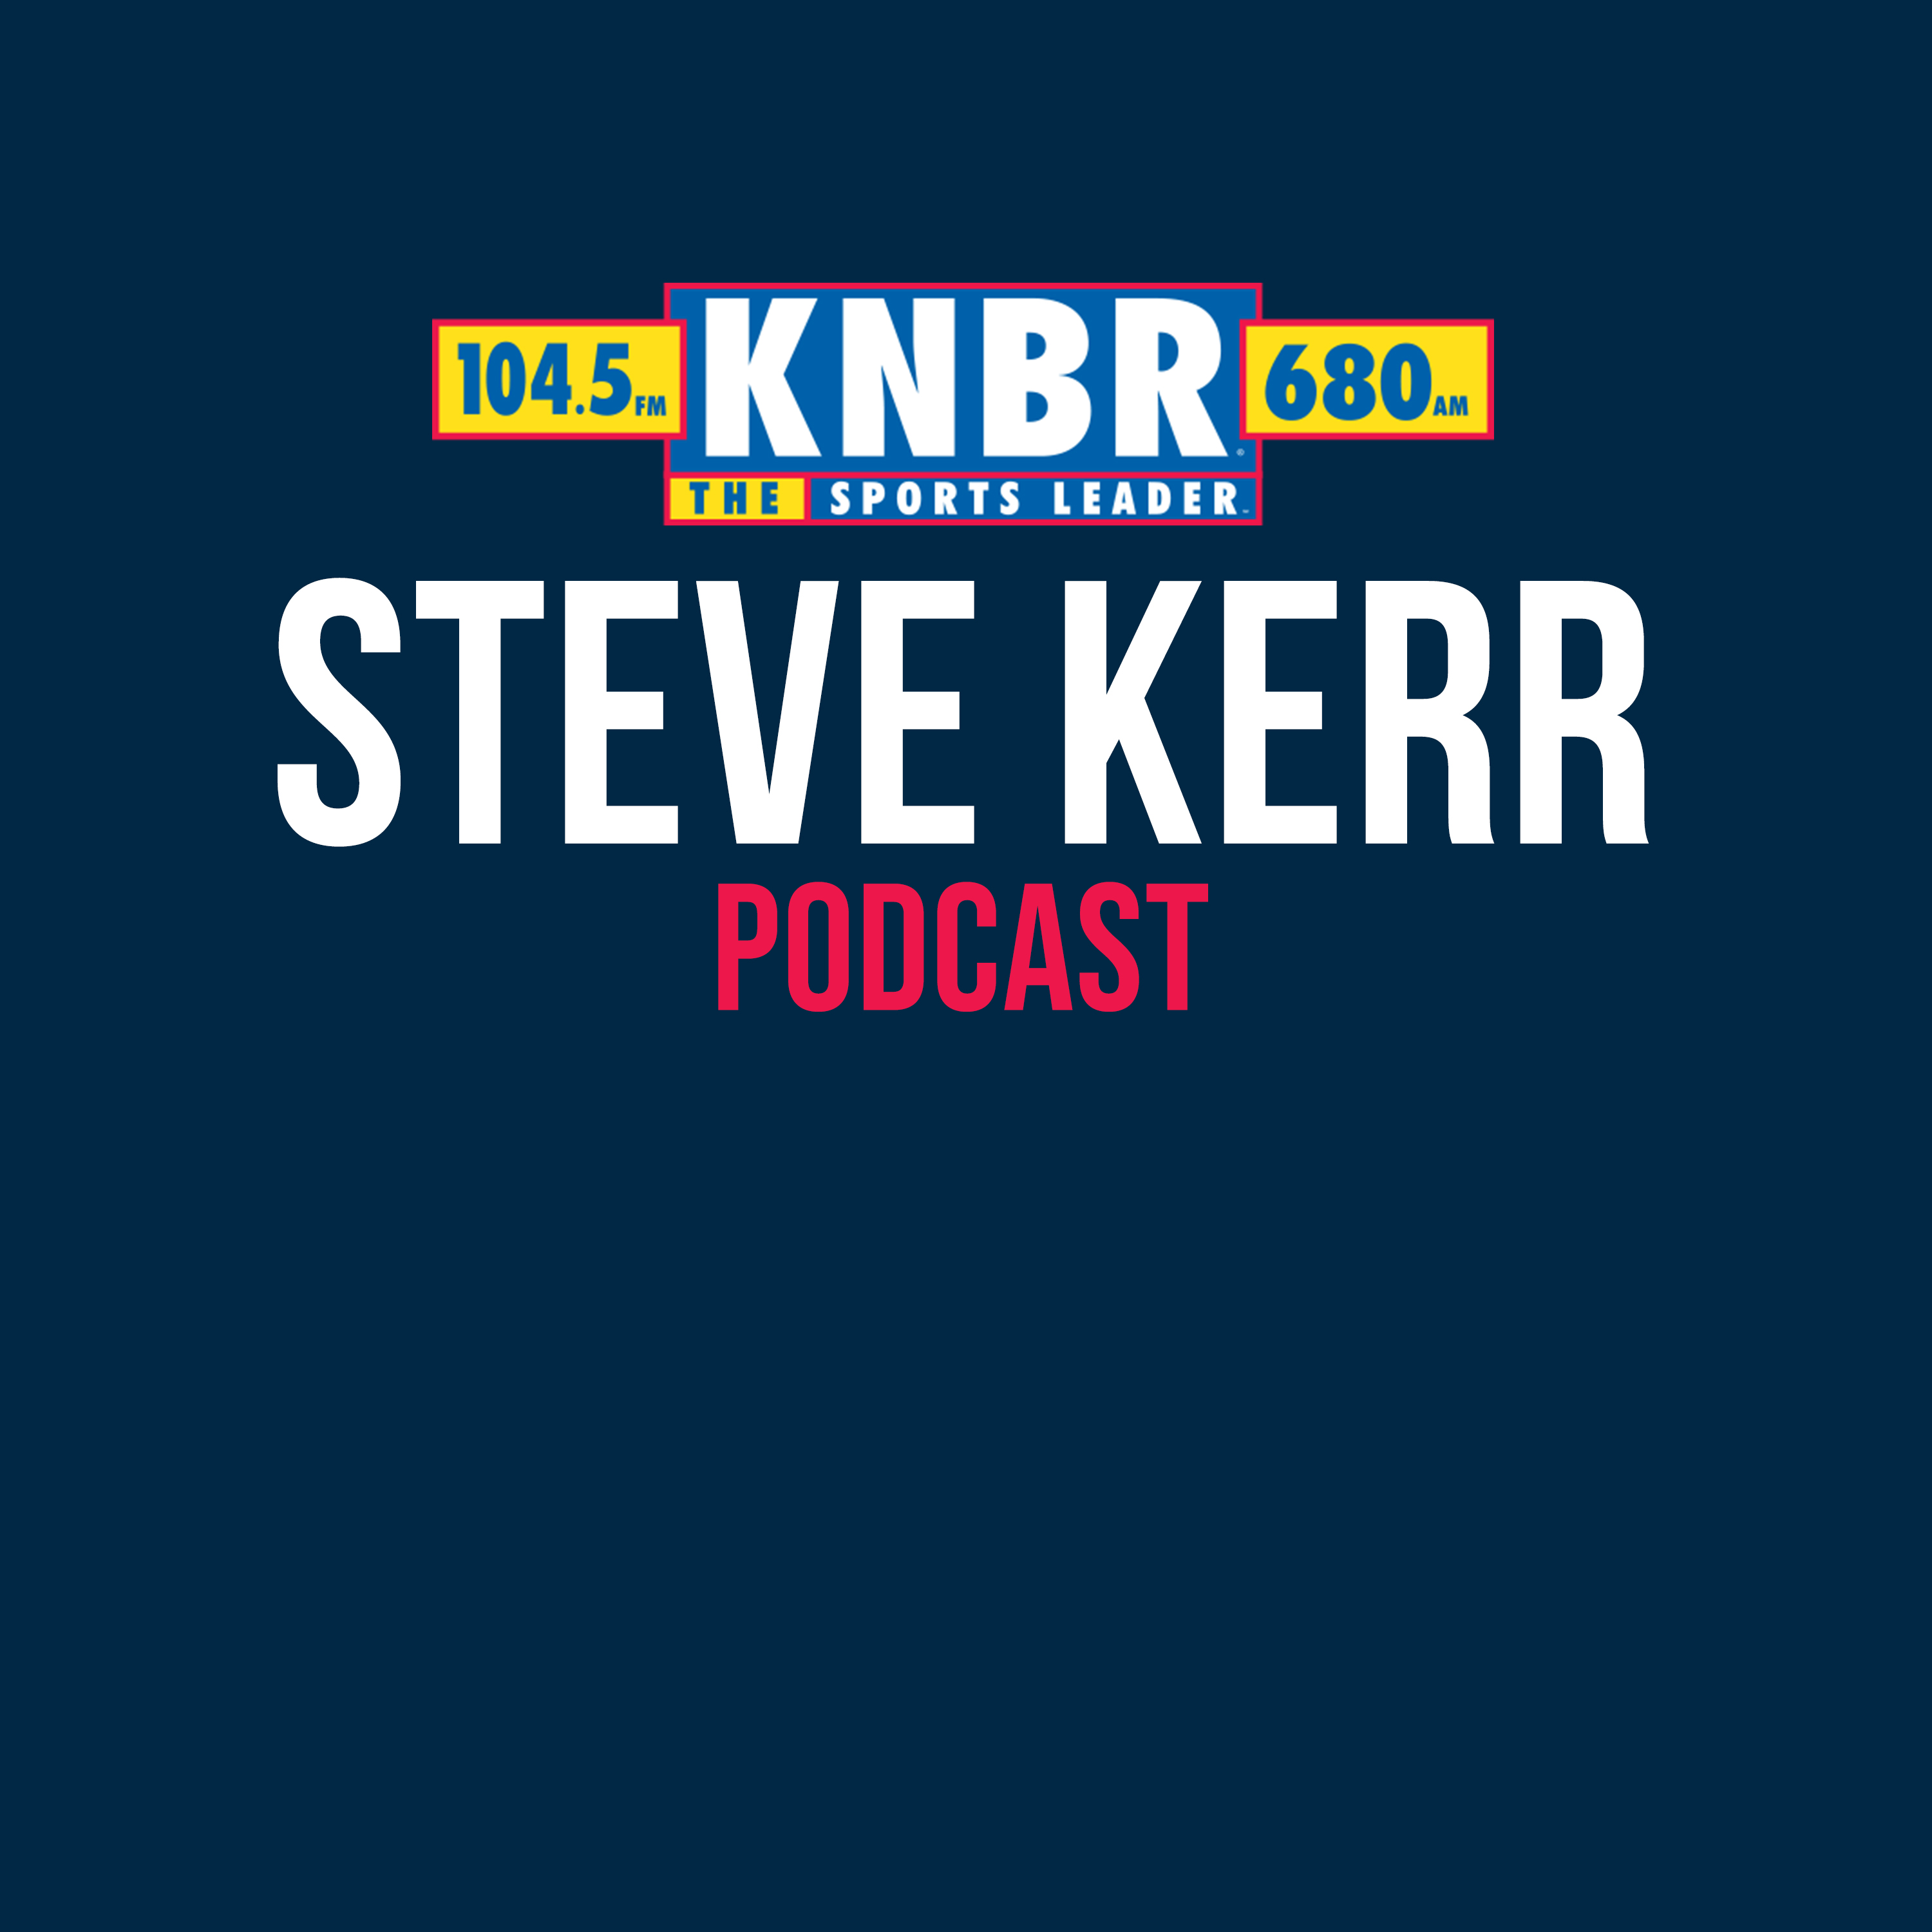 11-22 Steve Kerr joins Copes & Crowley to discuss the Warriors finally getting a road win